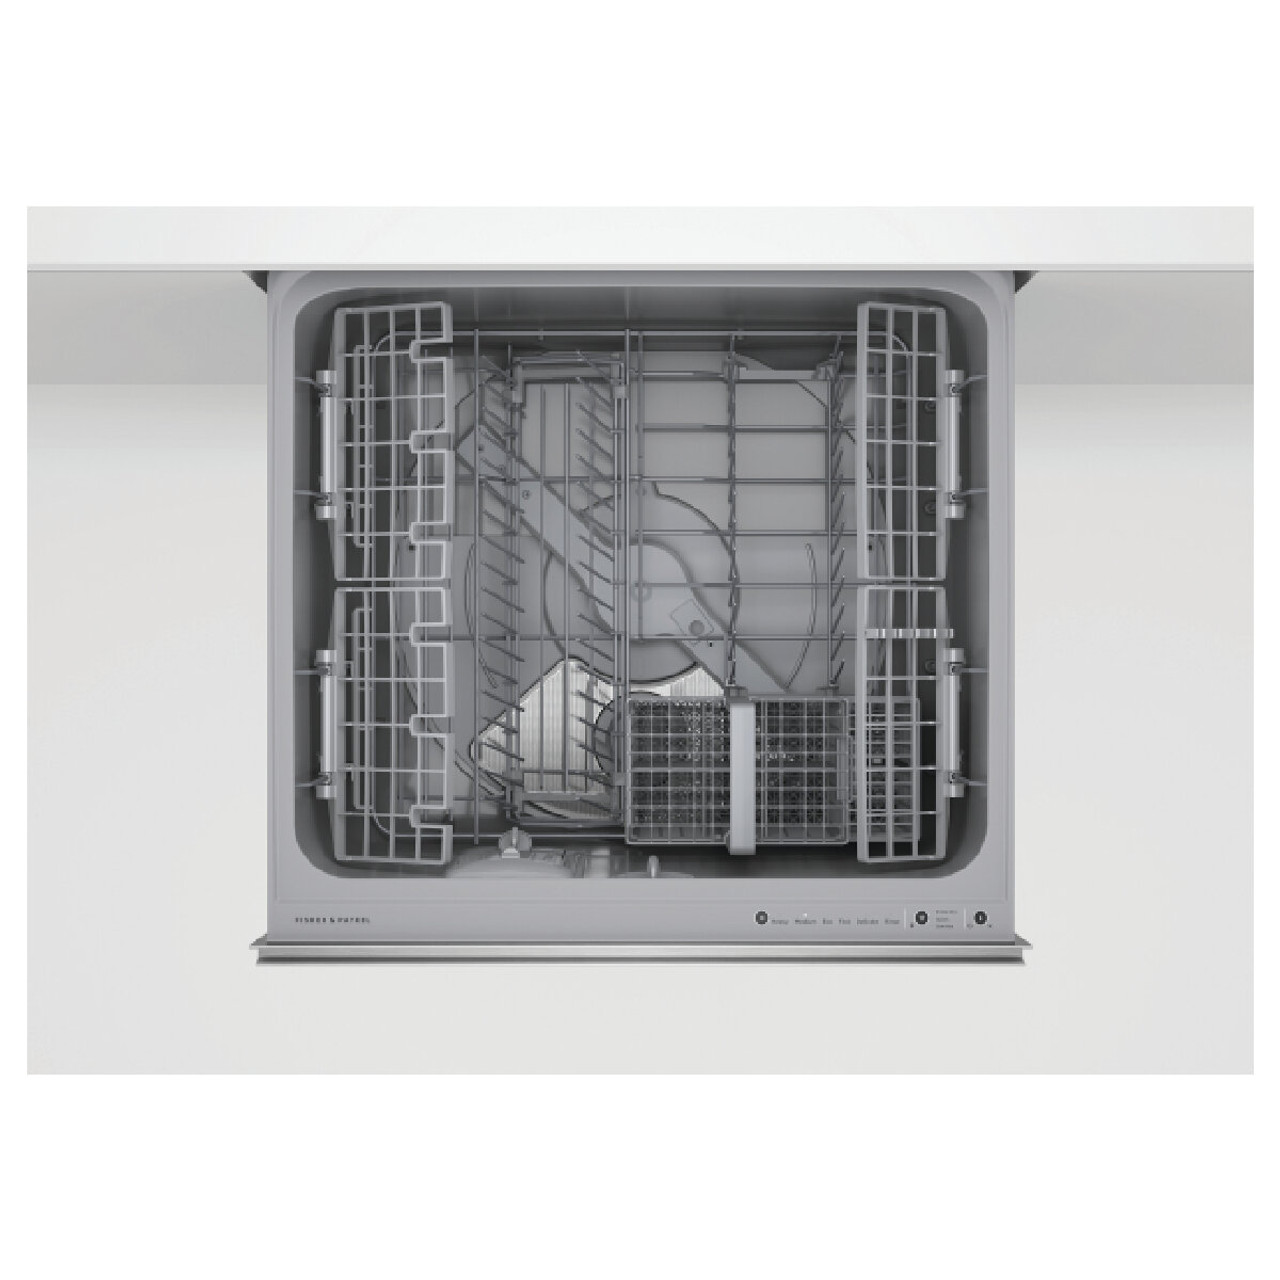 Series 9 Built-Under Double DishDrawer Dishwasher - Stainless Steel